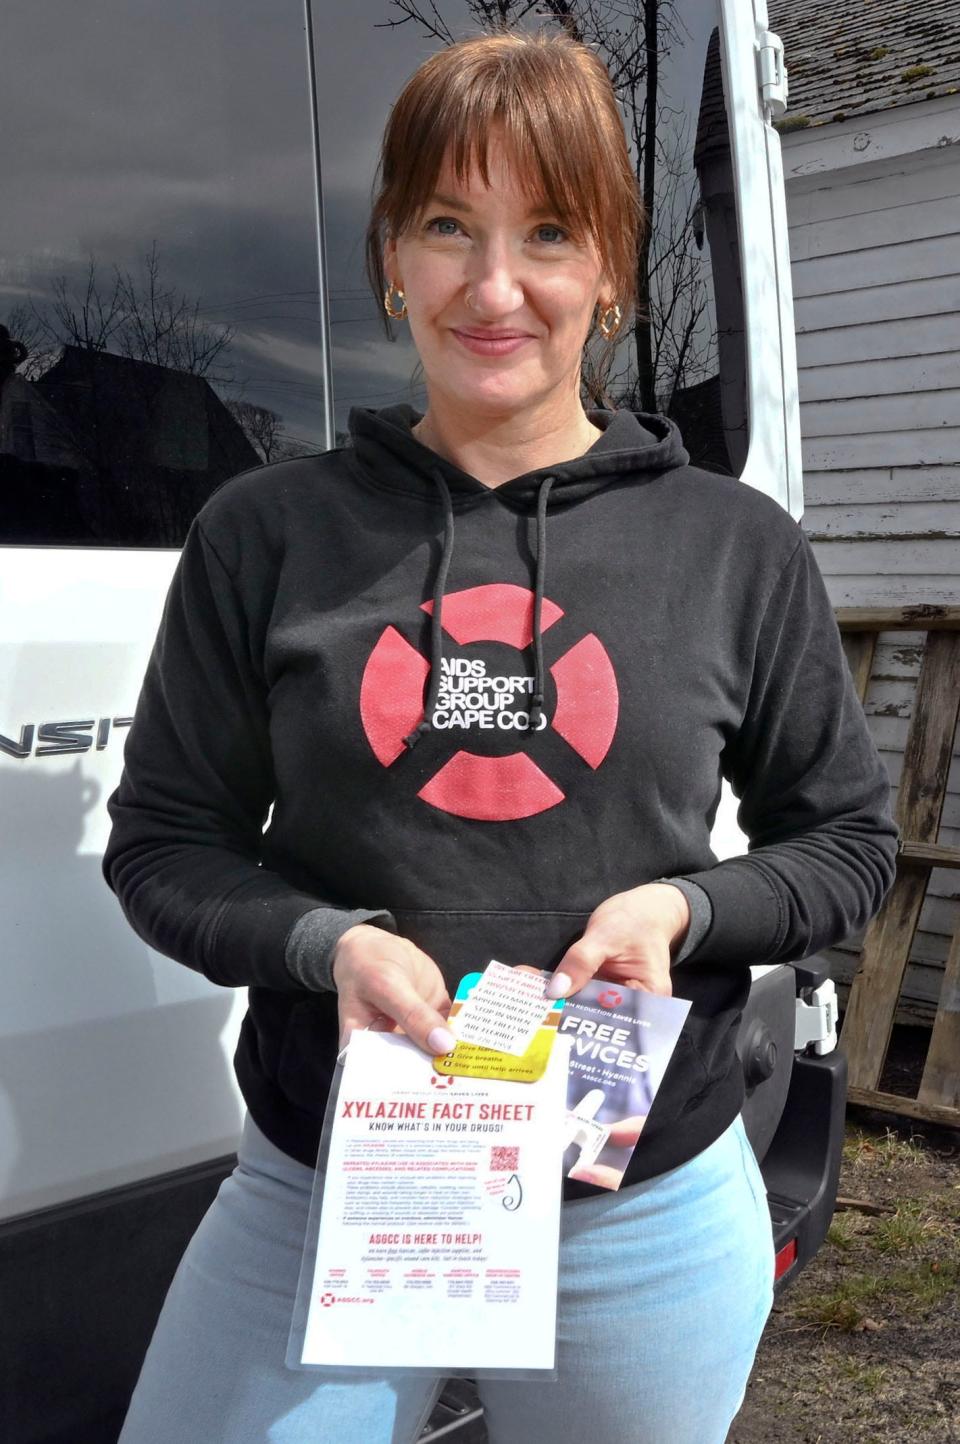 Eliza Morrison, program manager for the AIDS Support Group in Hyannis holds pamphlets about xylazine often passed out to prospective clients.